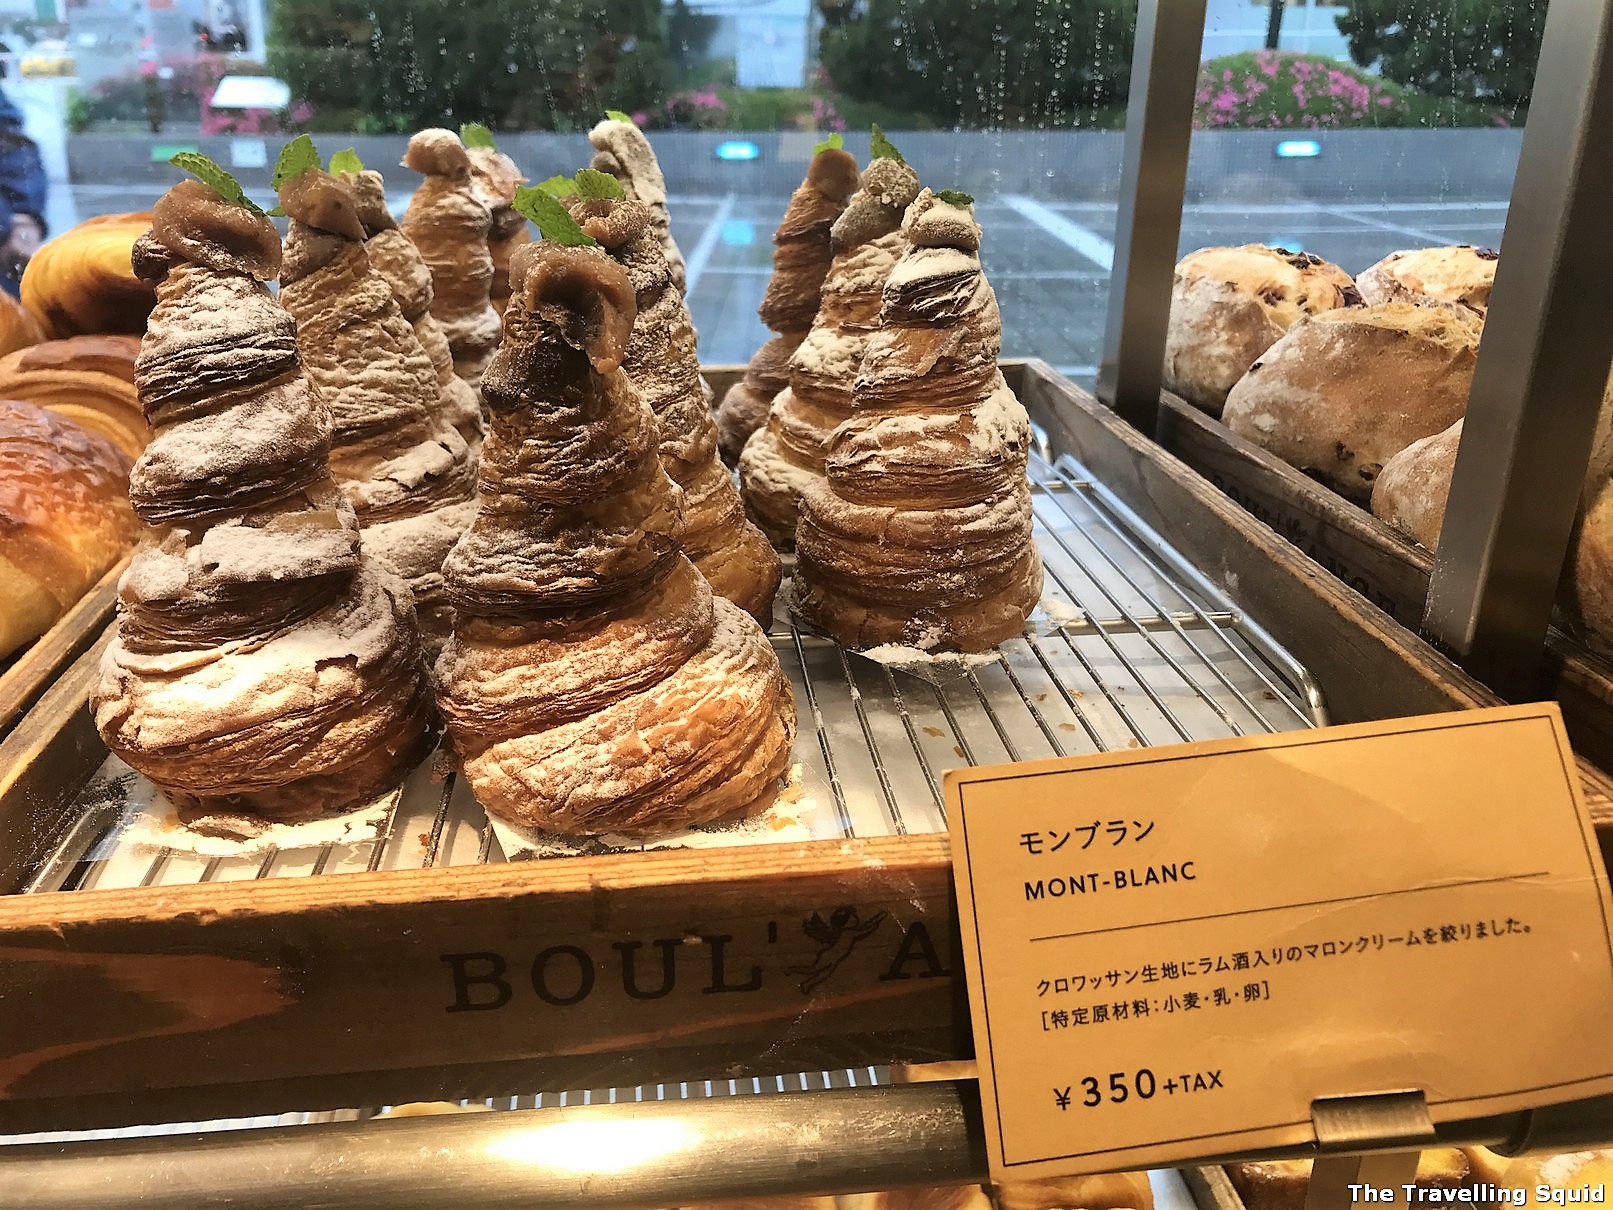 Boulange for one of the best bakeries in Shinjuku